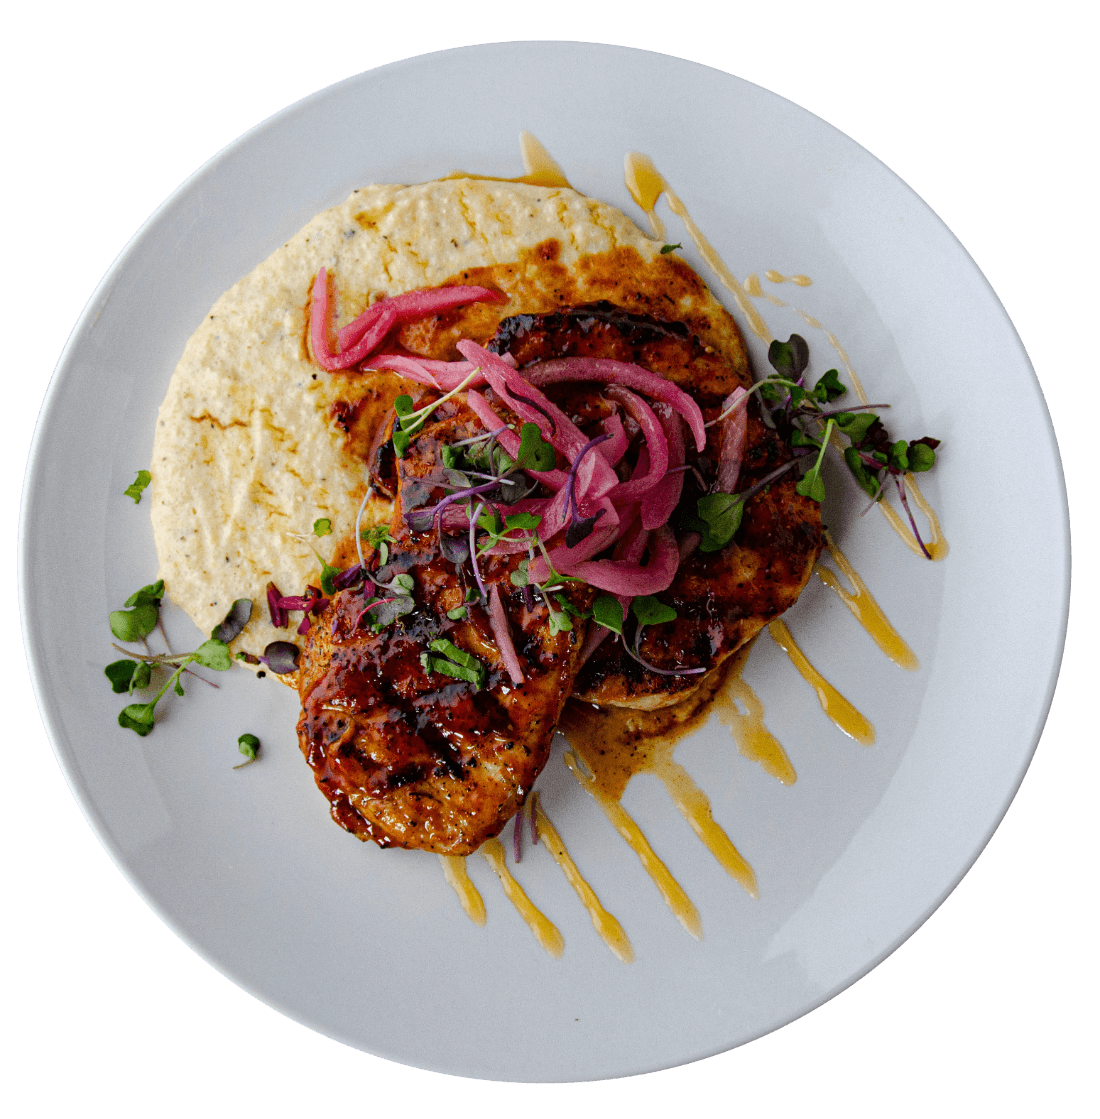 grilled rustic pork chops over pimento cheese grits w/ habanero honey and house-pickled onions